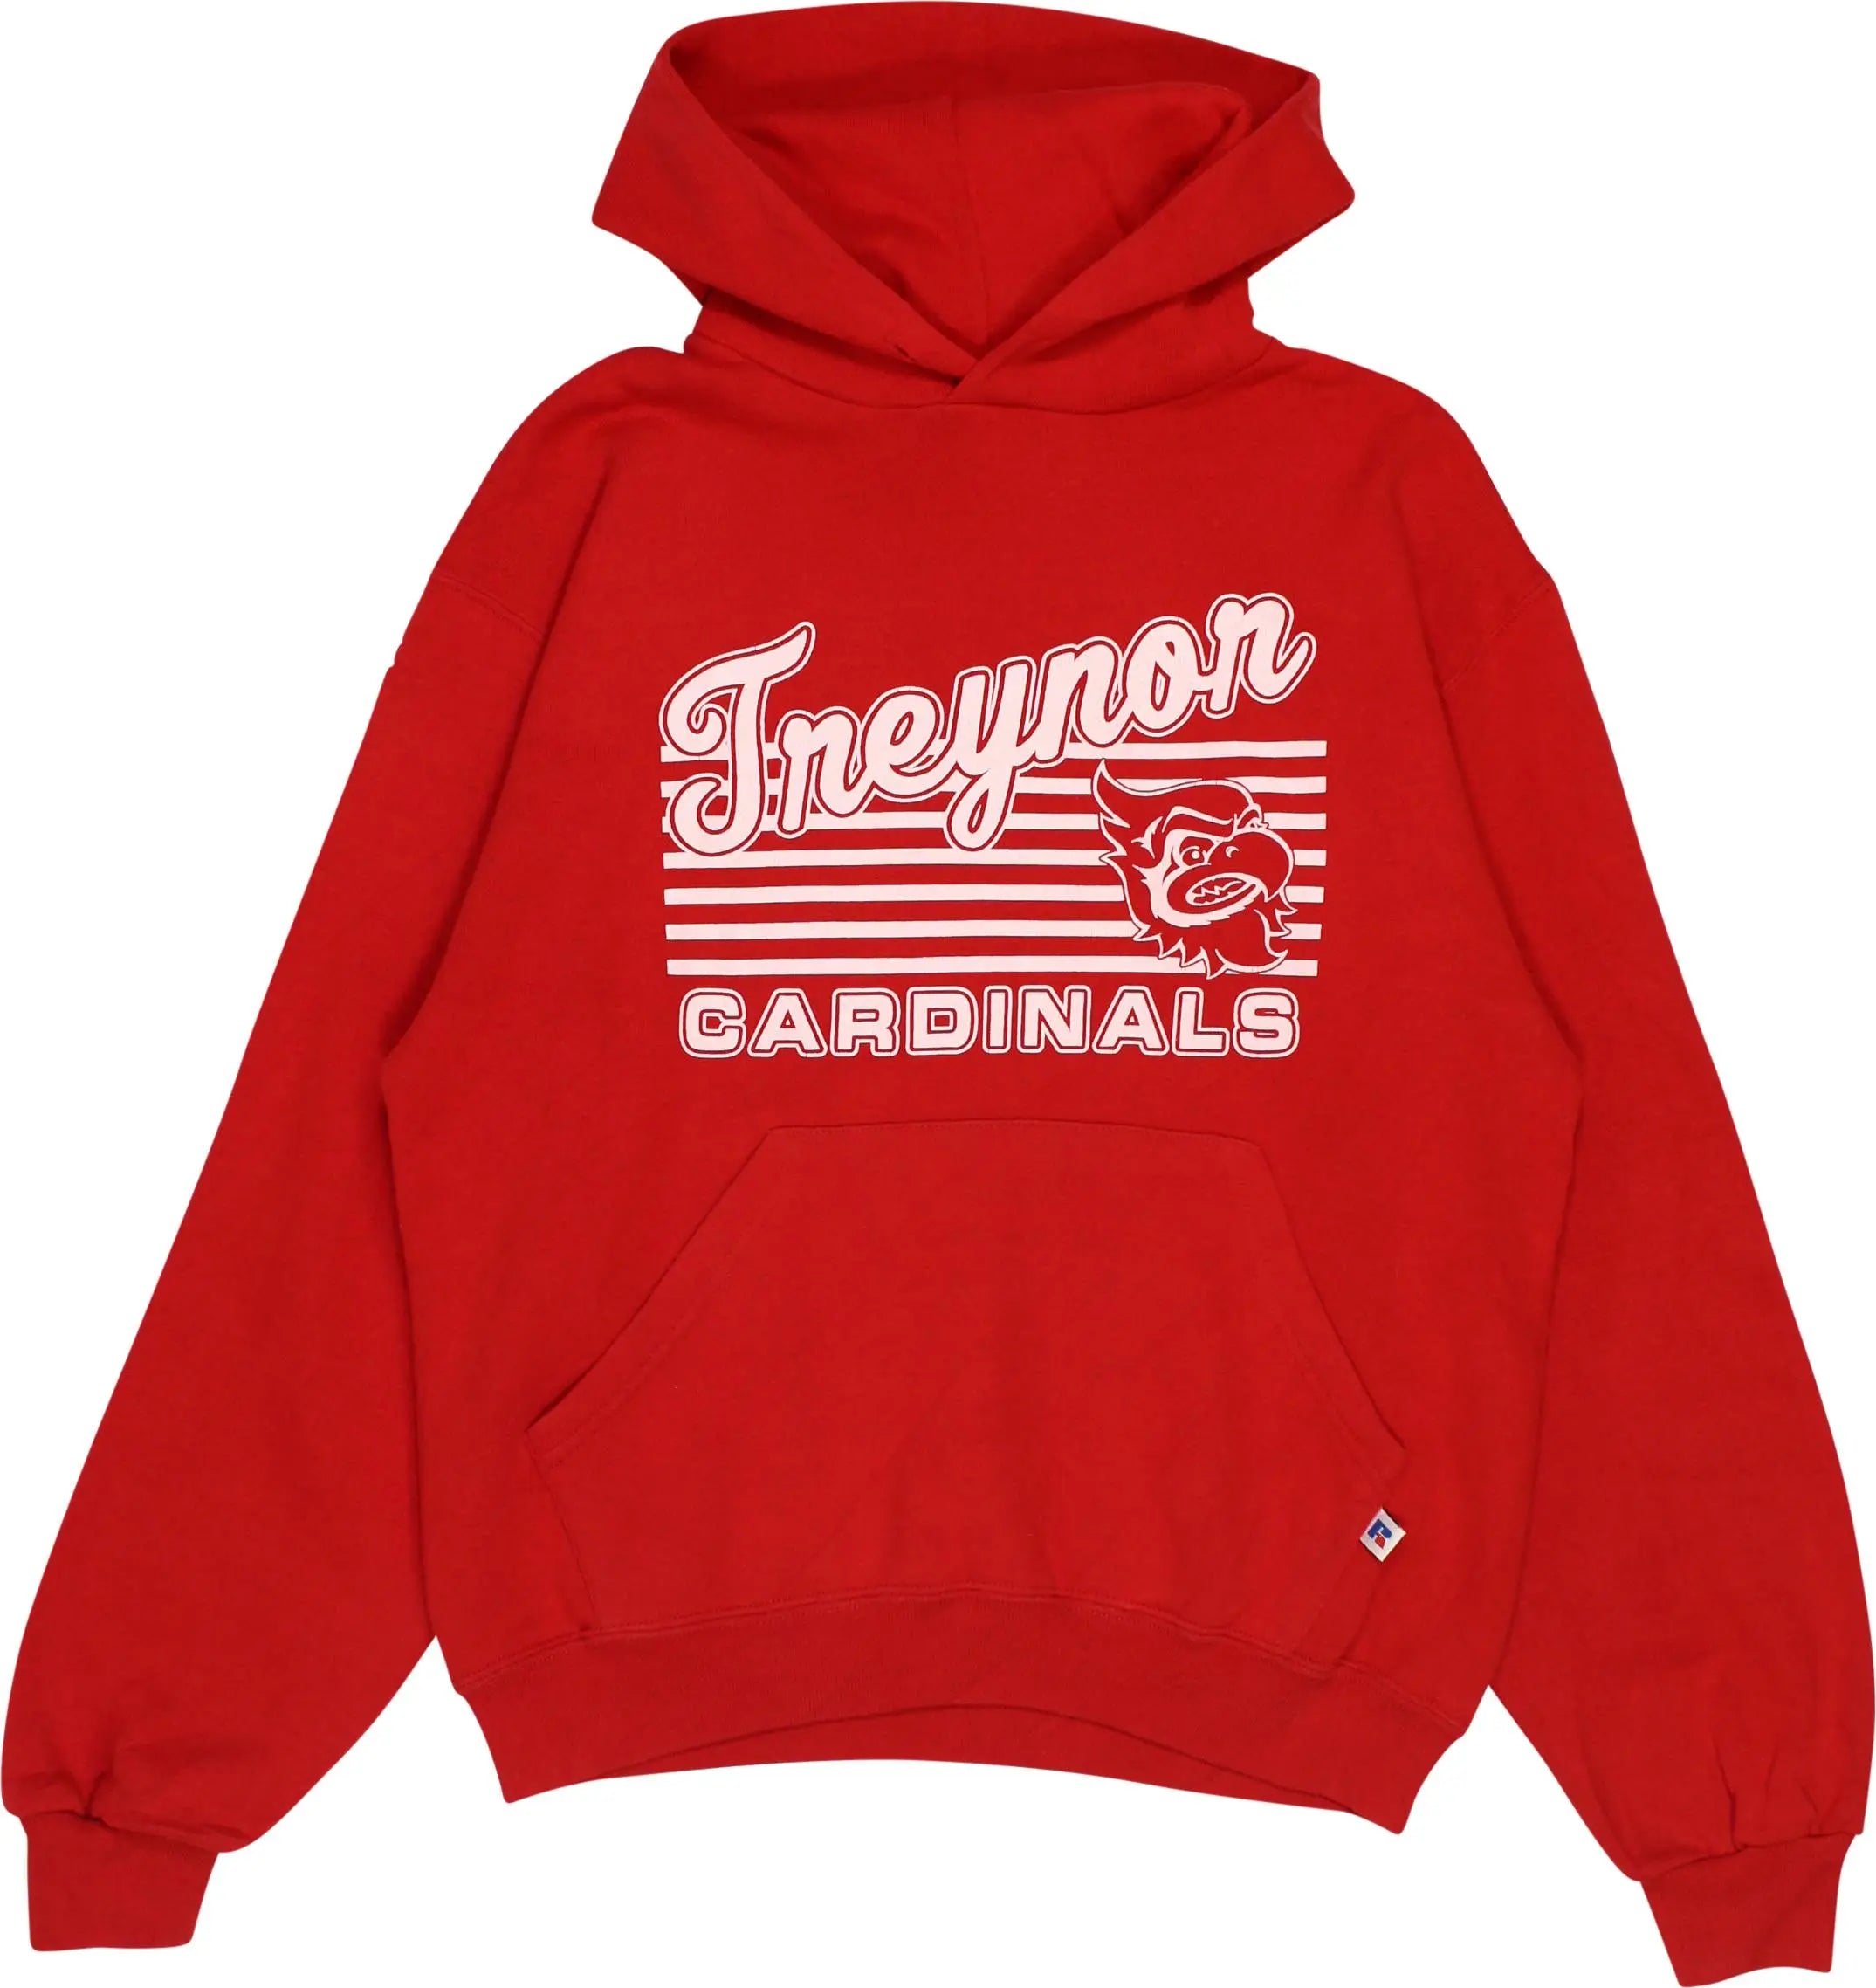 Russell Athletic - Treynor Cardinals Baseball Hoodie- ThriftTale.com - Vintage and second handclothing